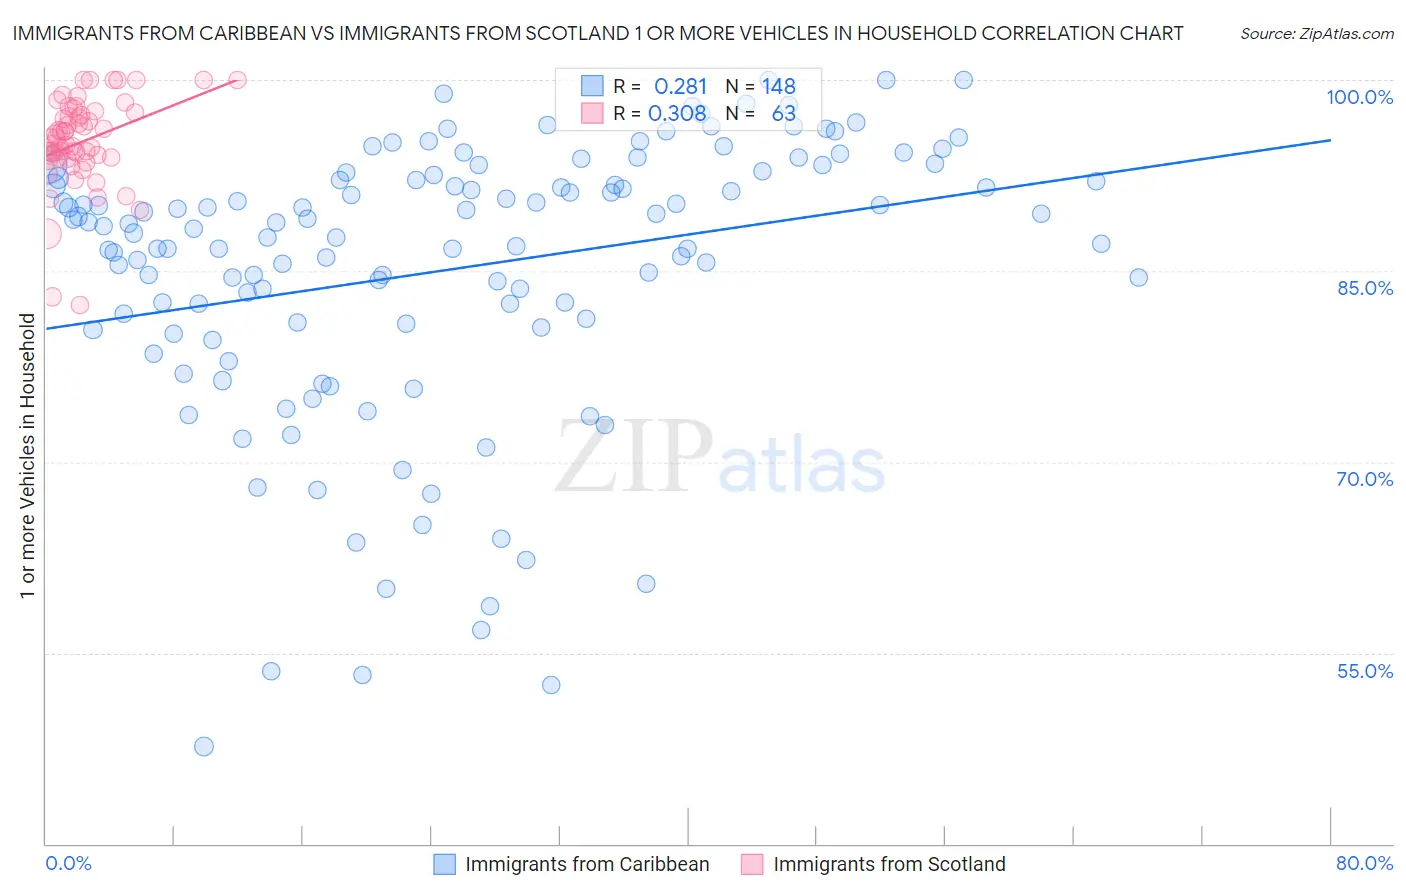 Immigrants from Caribbean vs Immigrants from Scotland 1 or more Vehicles in Household